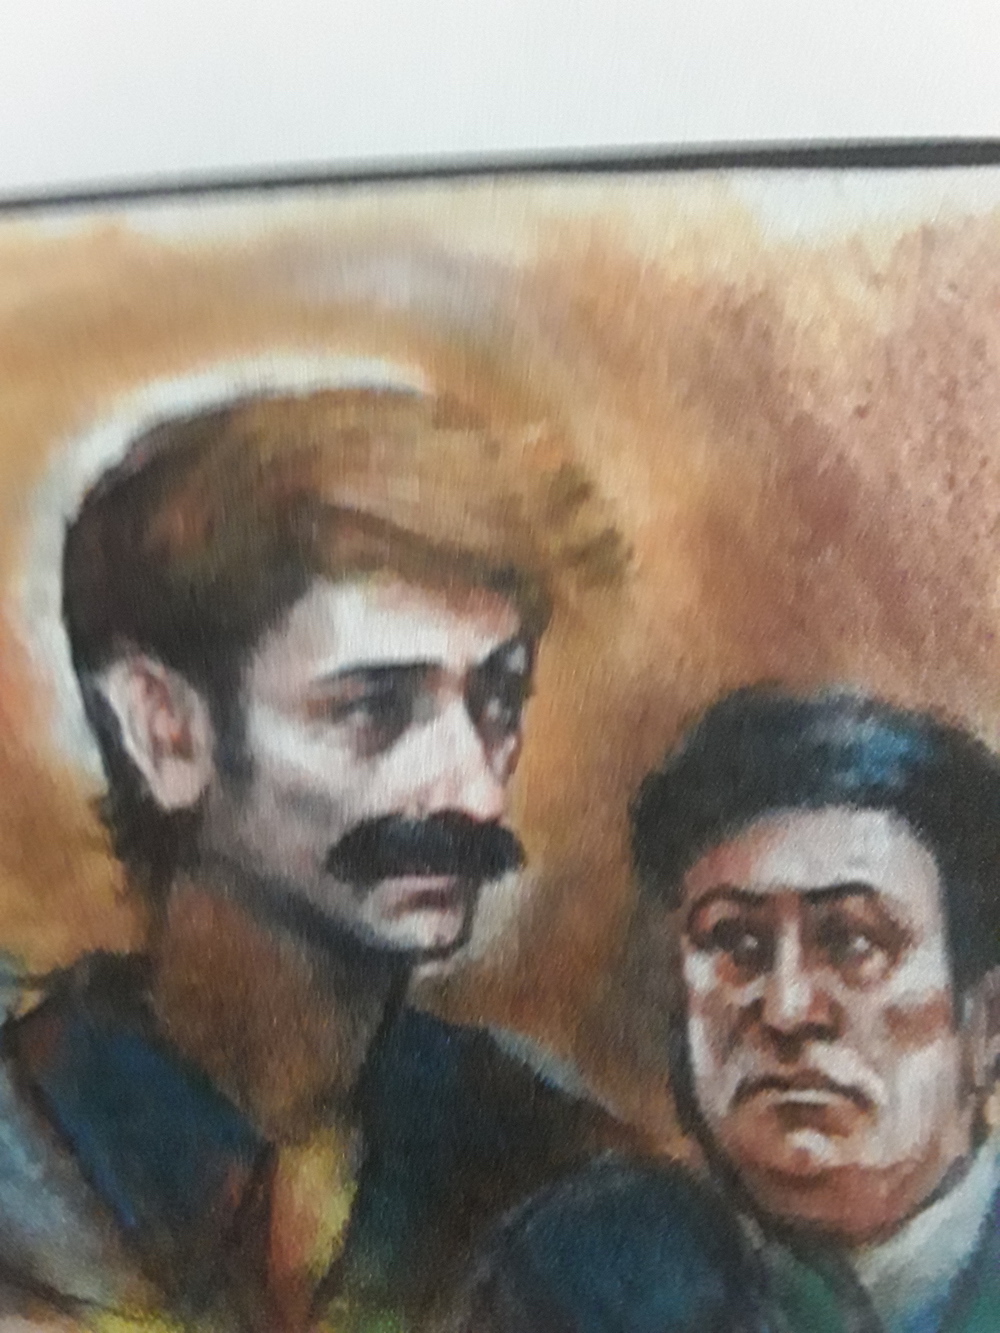 Court portrait: Buddy Jacobson at his trial with his attorney Jack Evseroff. Illustration supplied by author